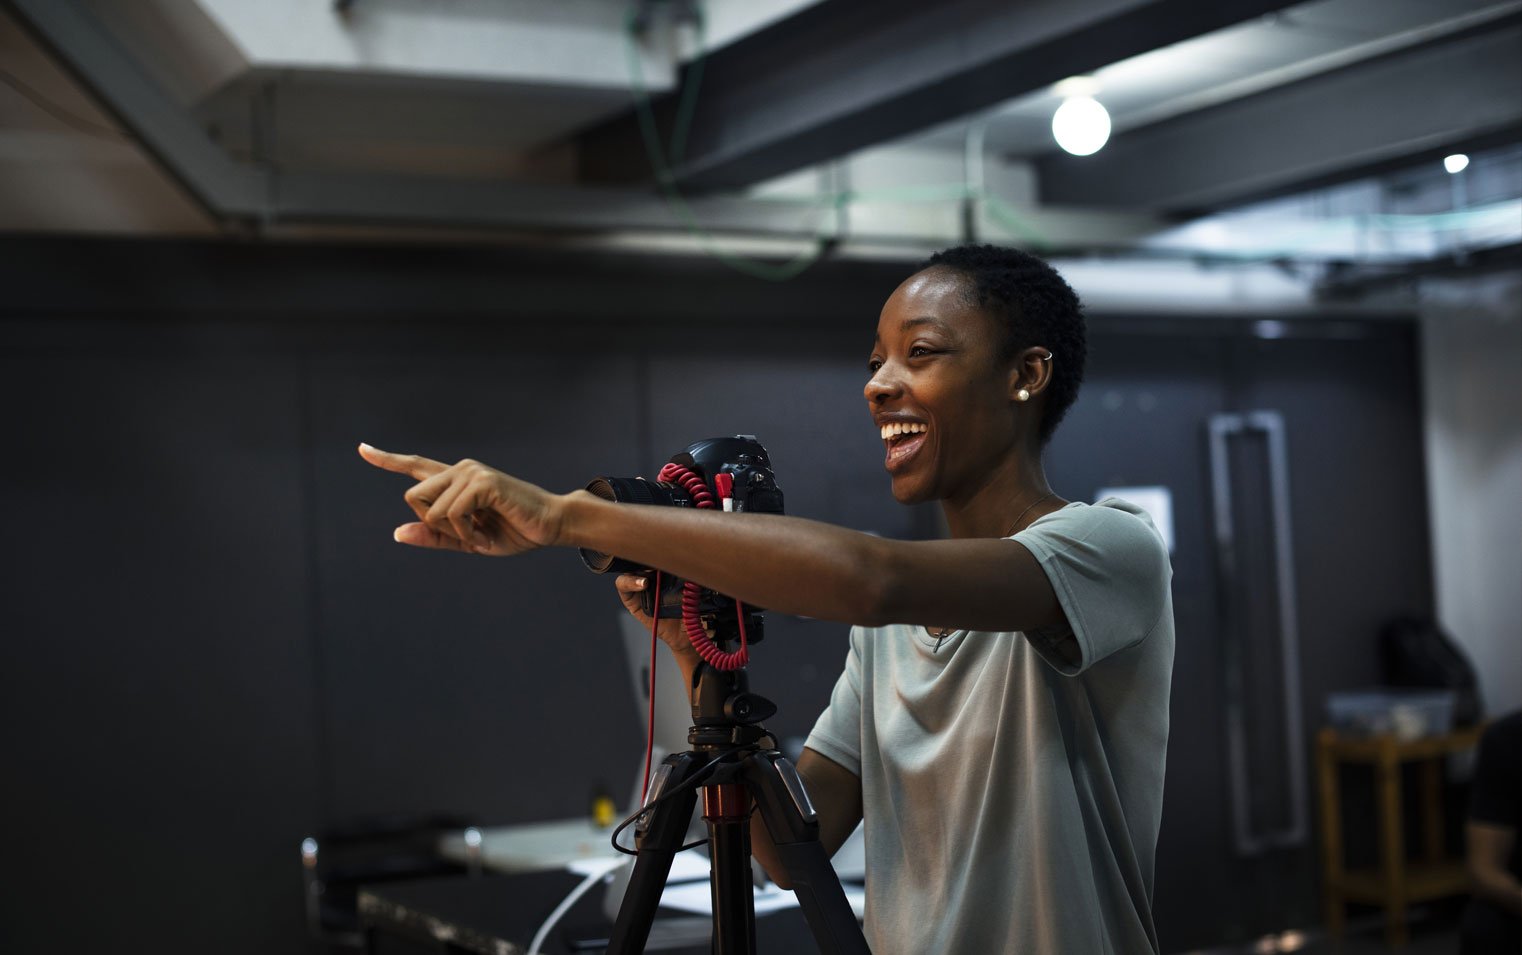 Smiling young African-American stands behind a camera on a tripod.